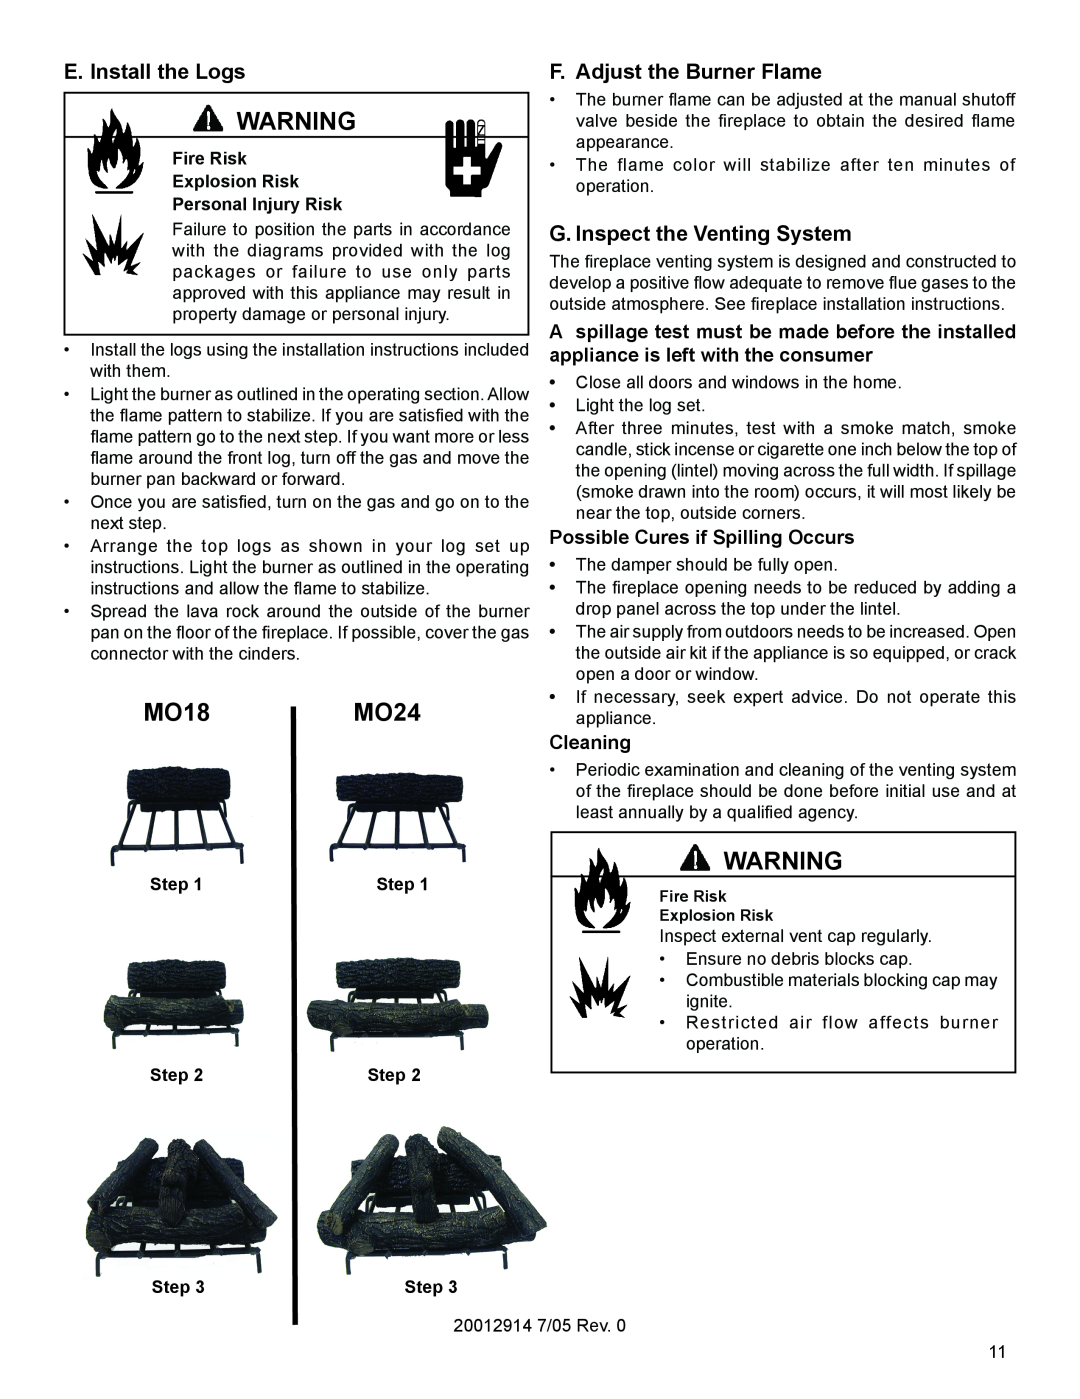 Vermont Casting MO18MO24, E. Install the Logs, F.Adjust the Burner Flame, G.Inspect the Venting System, Cleaning, Step 